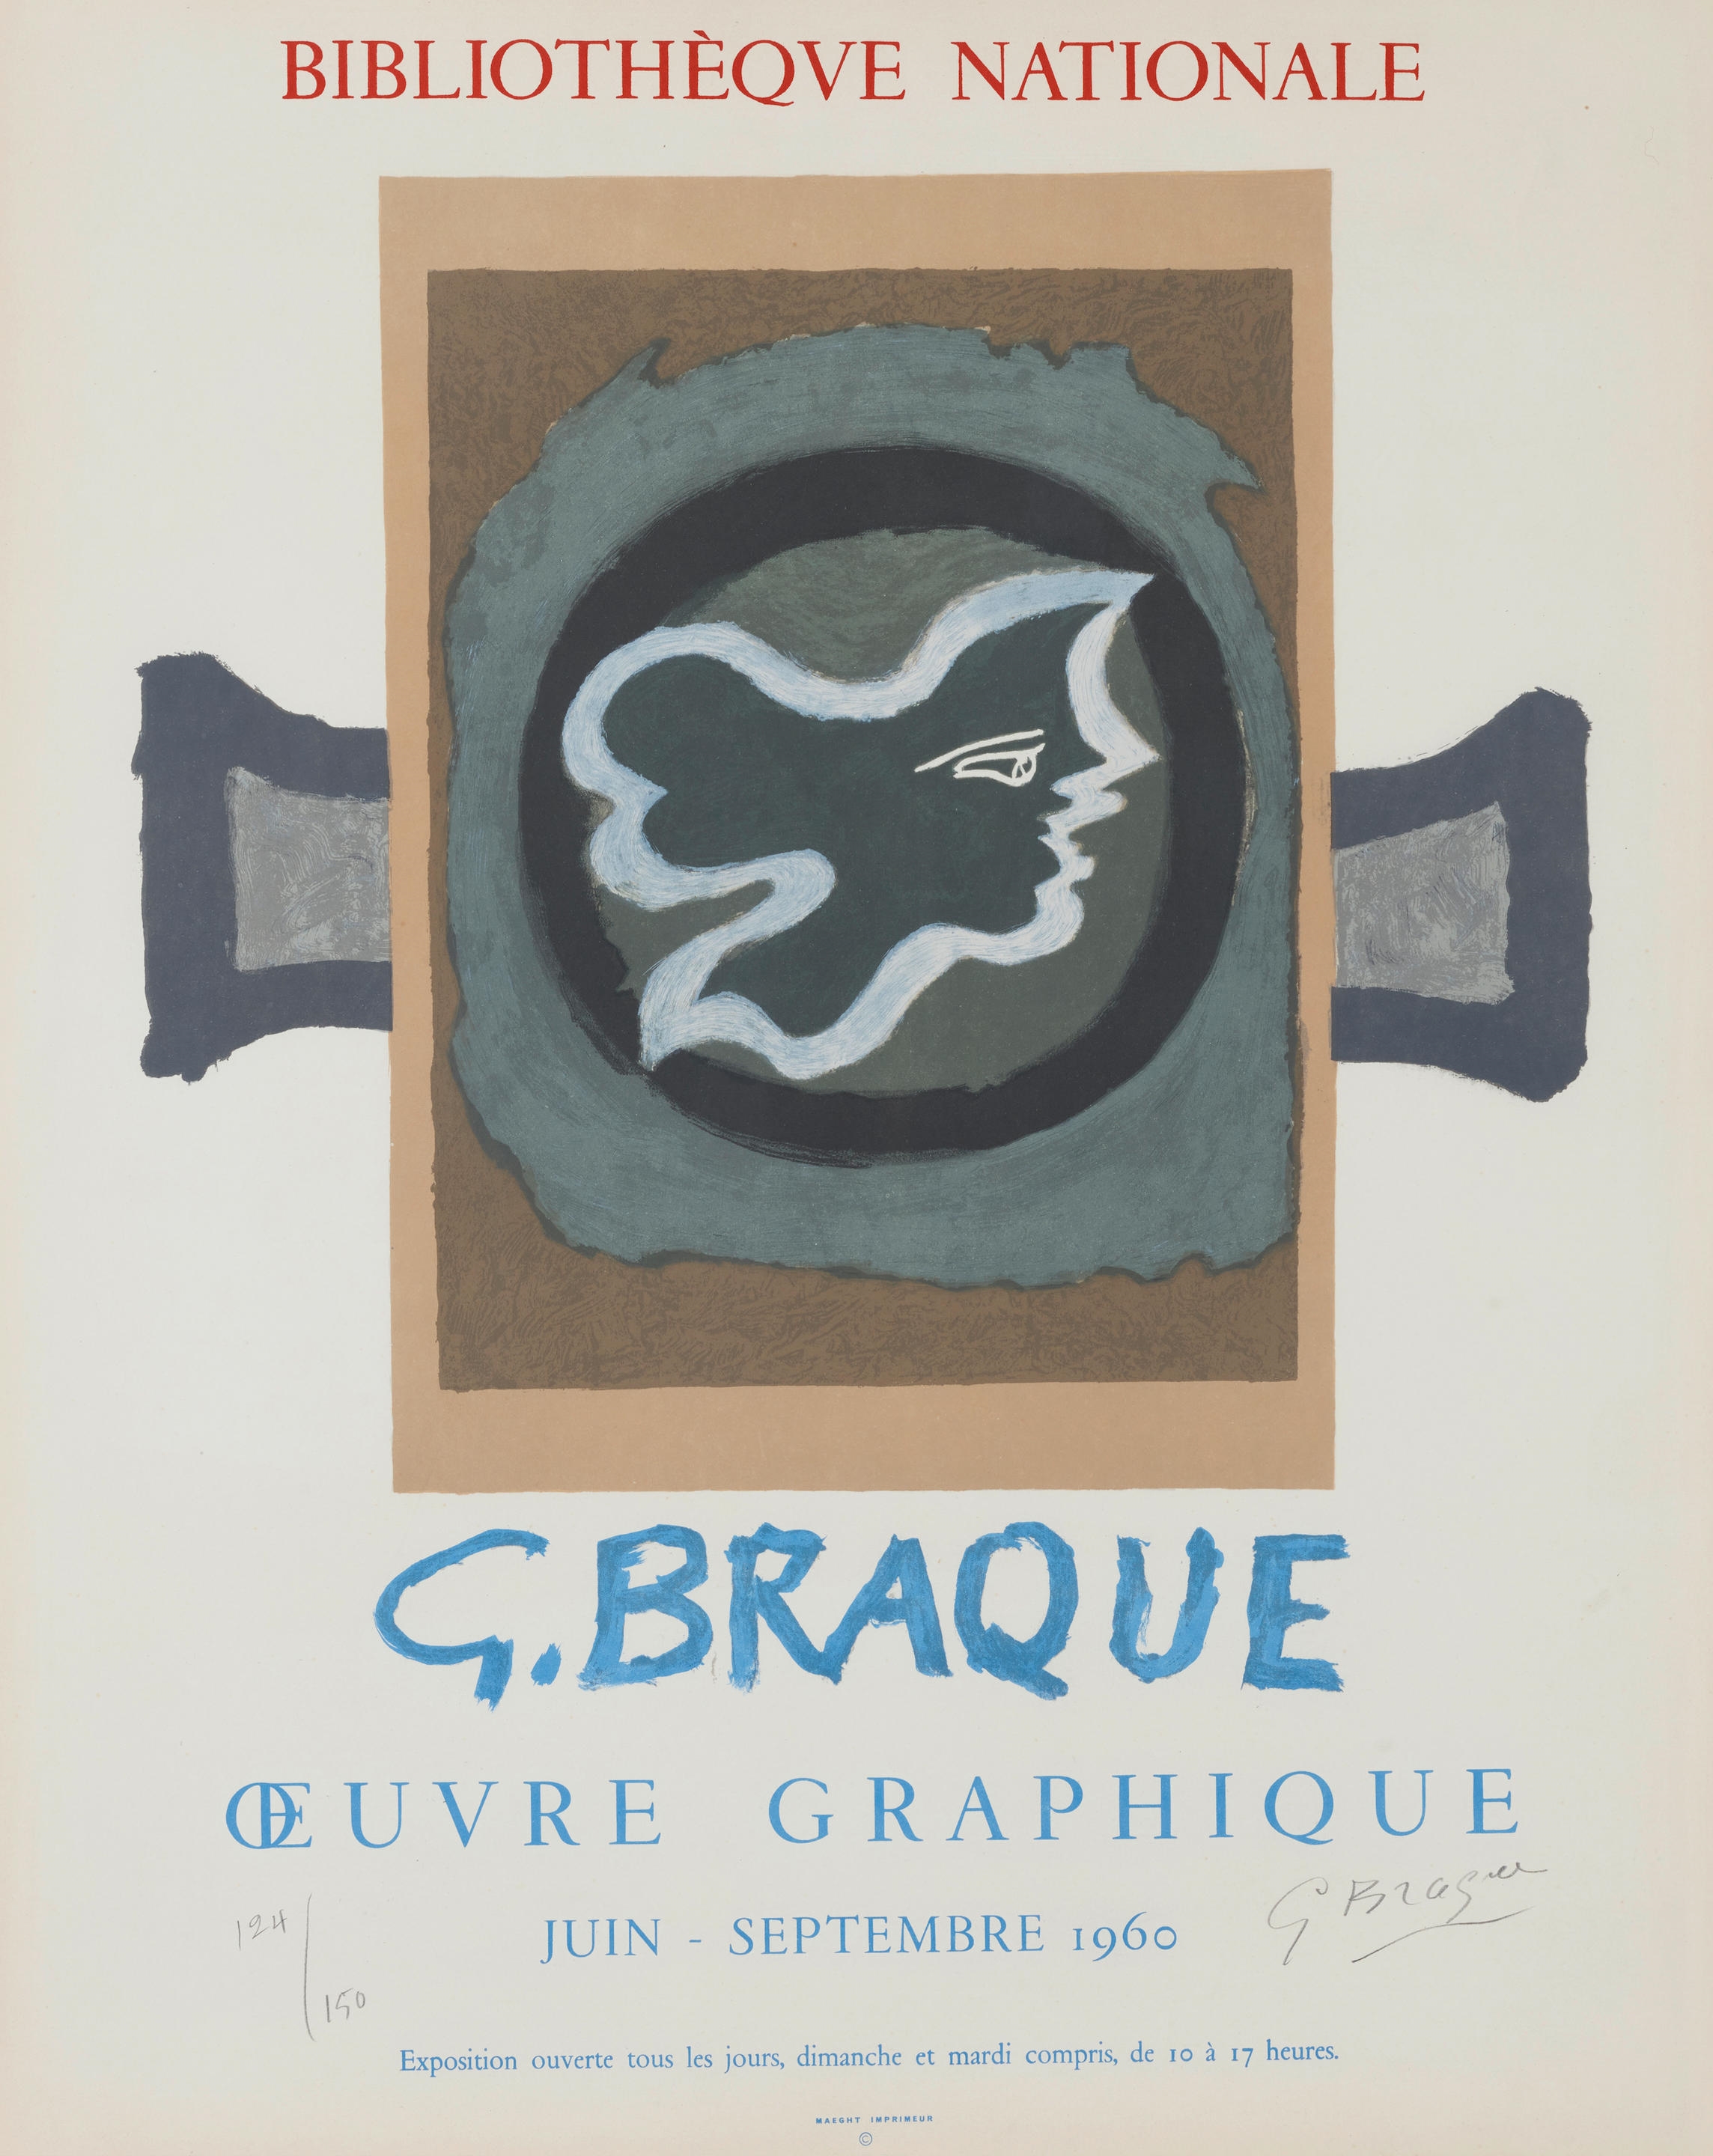 Bibliotheque Nationale by Georges Braque, 1960